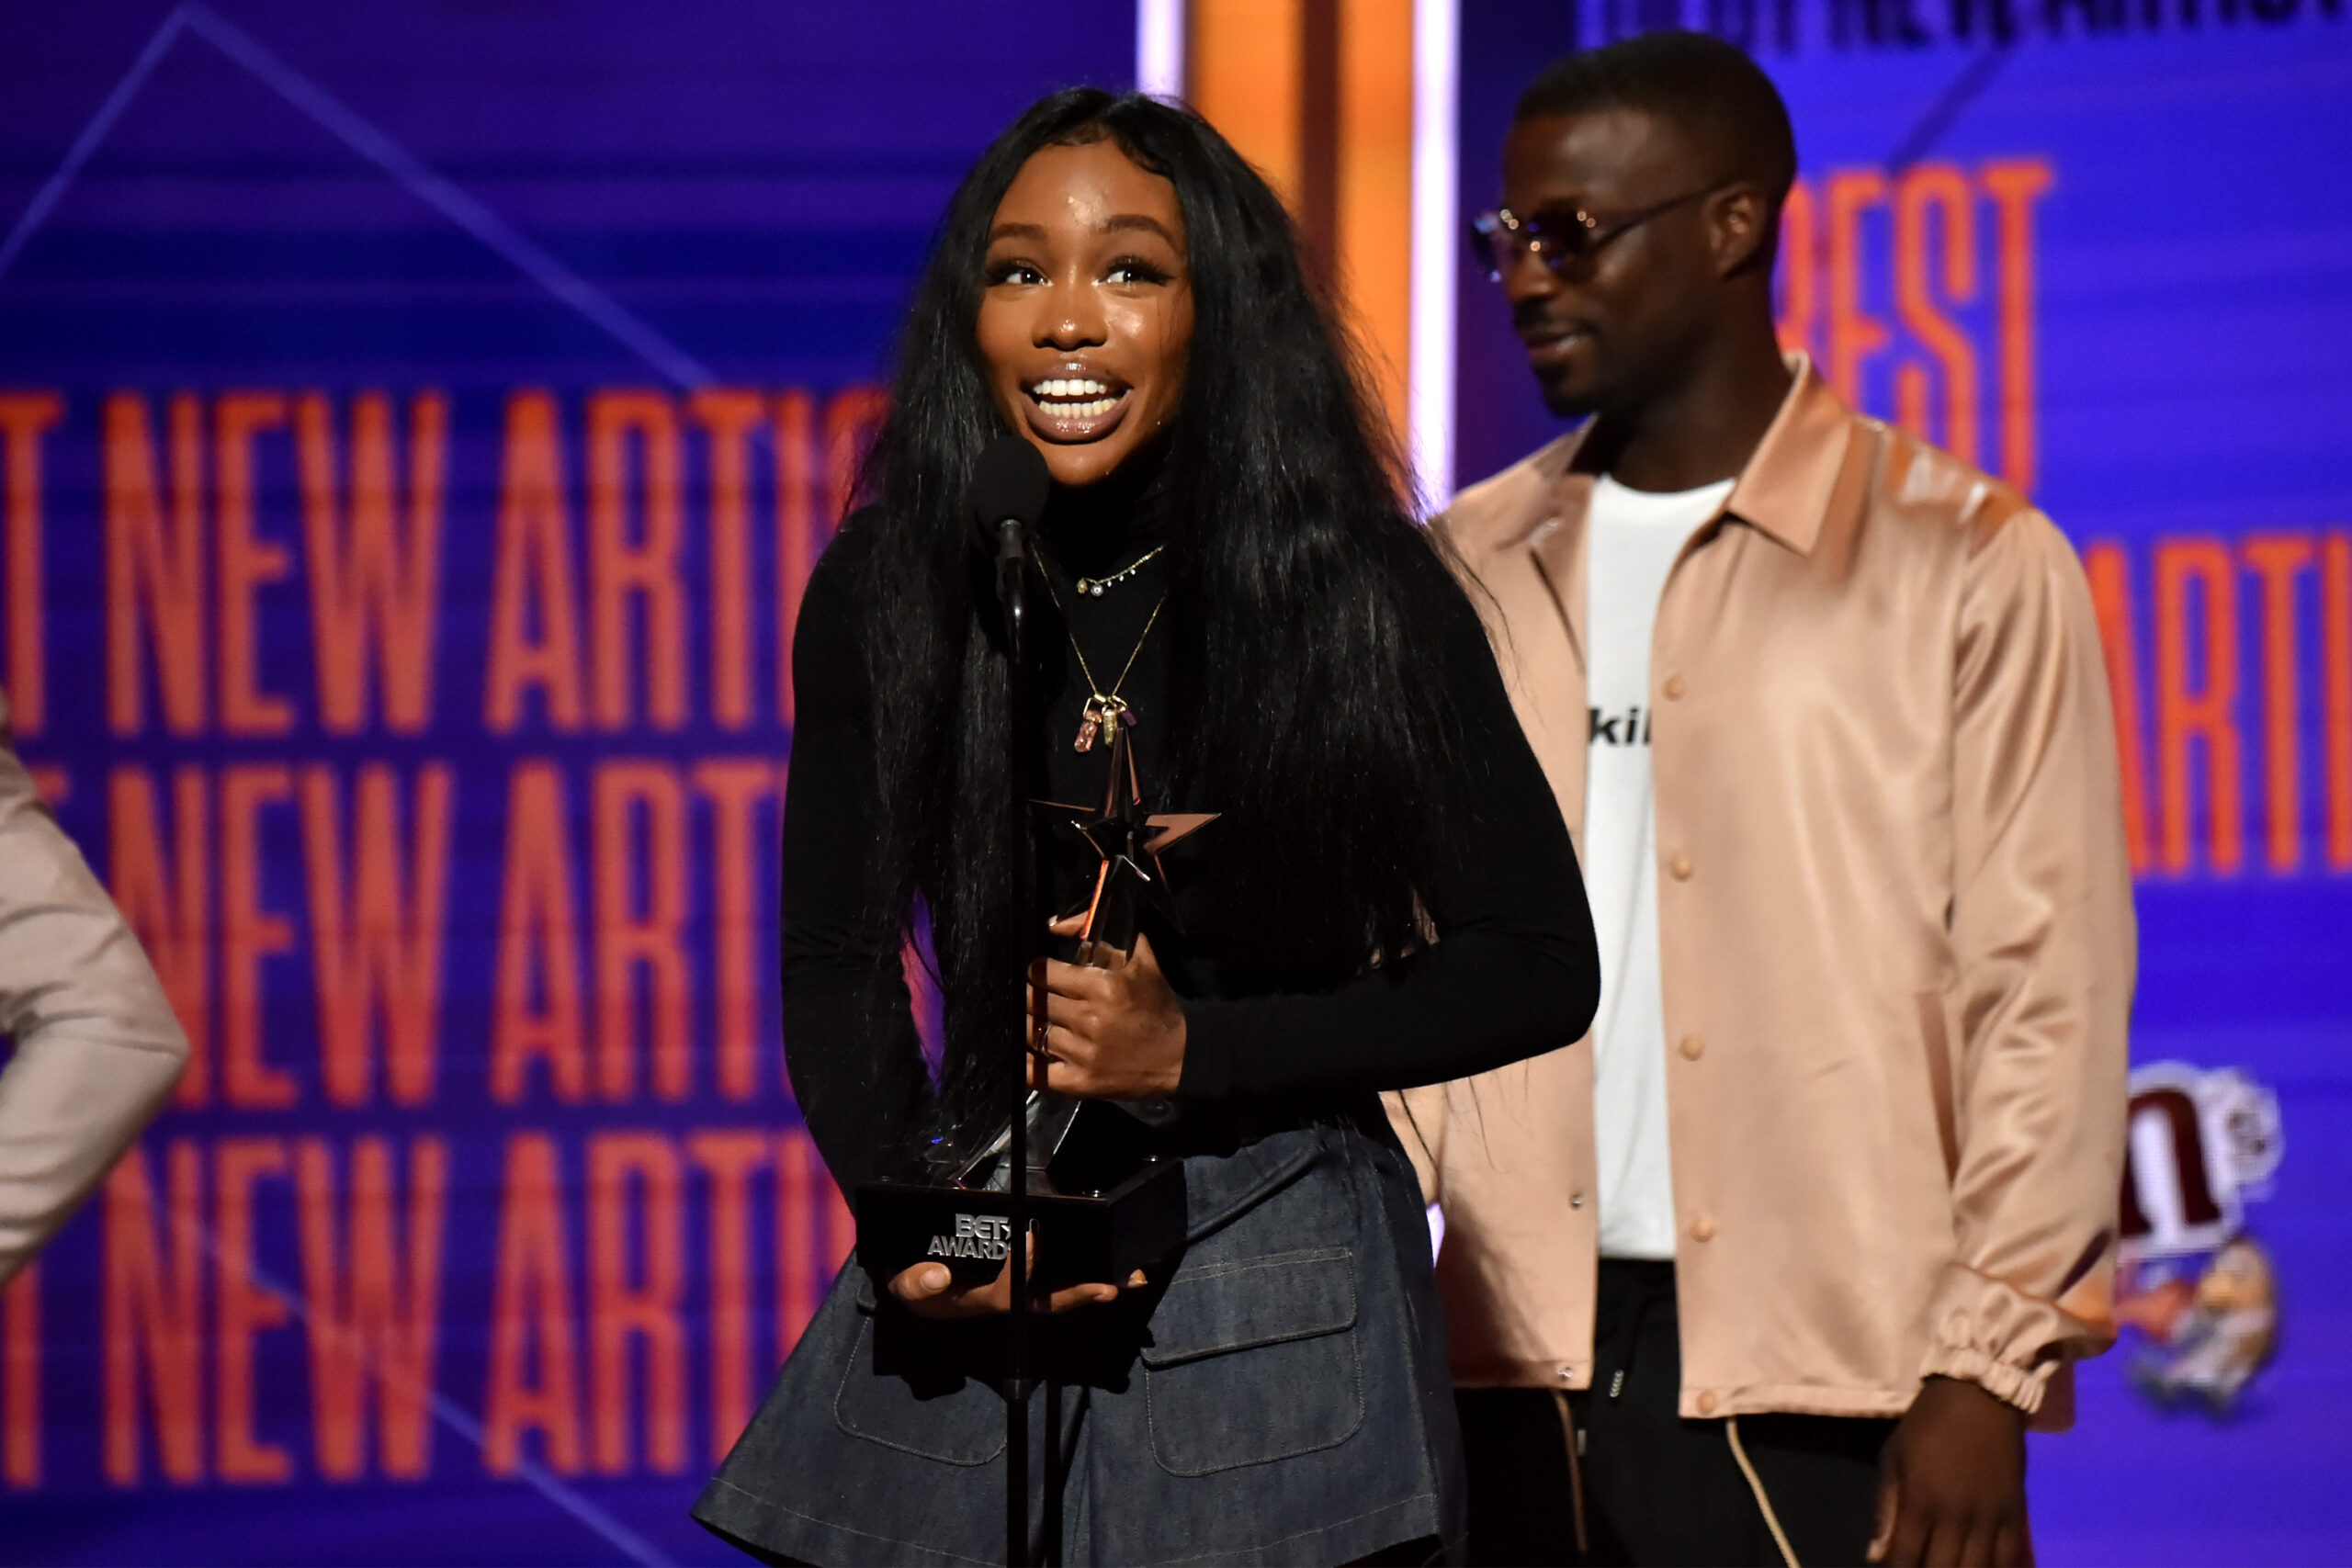 SZA’s Old Tweets About Other Artists Resurface Amid Drama With Teen Concertgoer